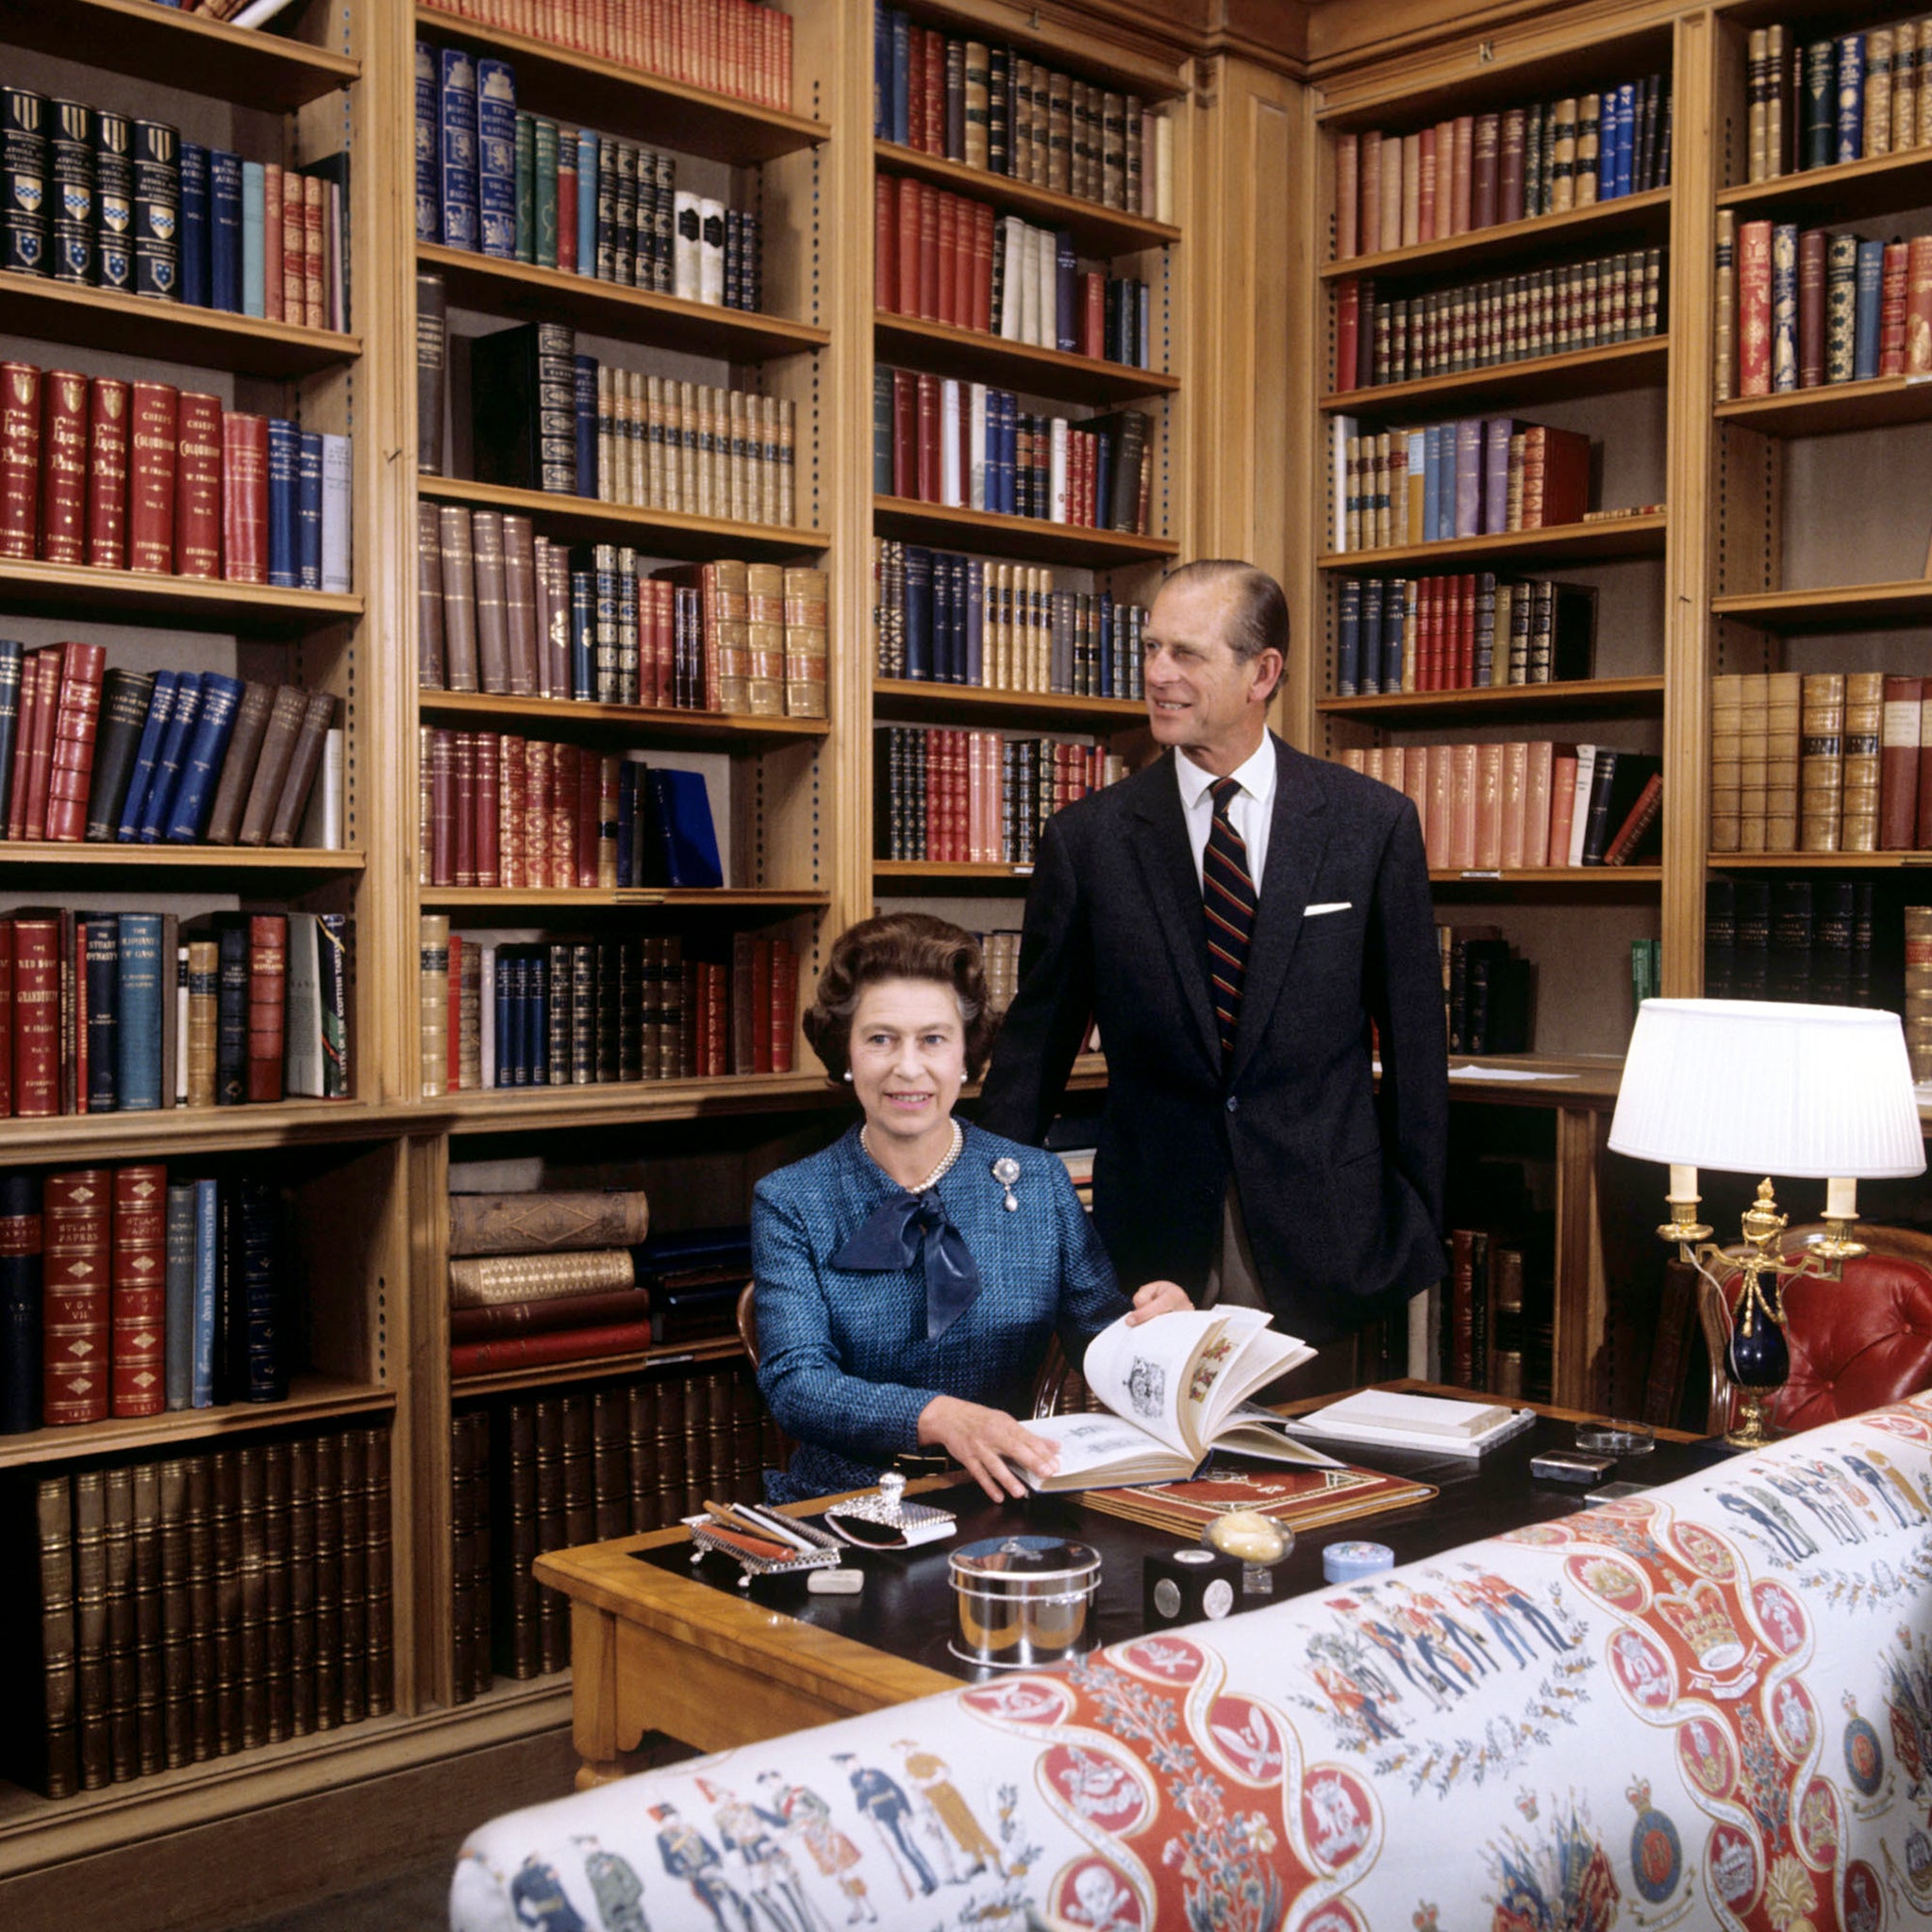 Queen Elizabeth II and the Duke of Edinburgh during their traditional summer break at Balmoral Castle in 1976. The highland retreat is one of the Queen's favourite places, each year, she heads off to Scotland for the summer. ‘It is rather nice to hibernate for a bit when one leads such a moveable life,’ she once said